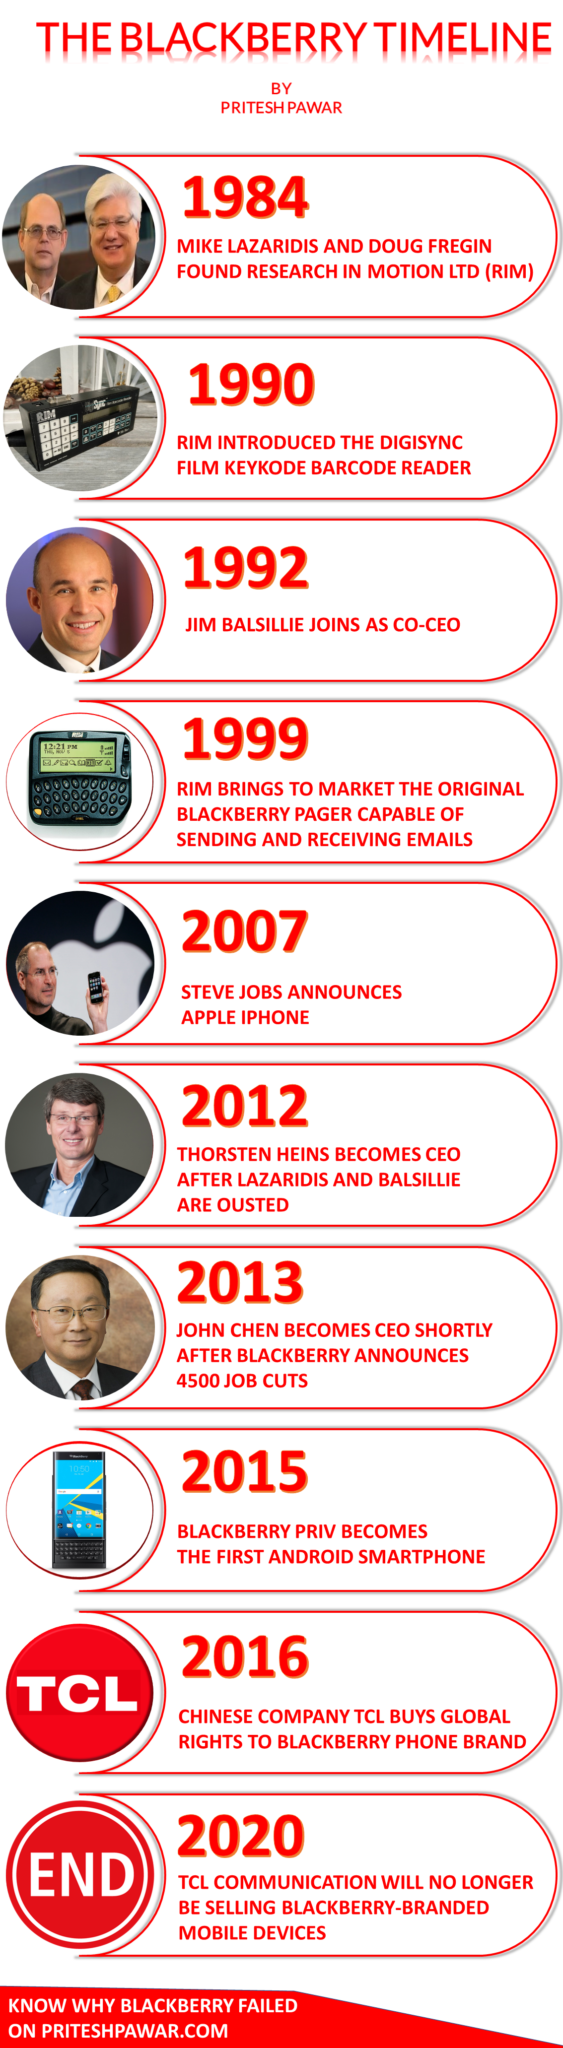 BlackBerry Timeline Infographic - Why BlackBerry Failed?